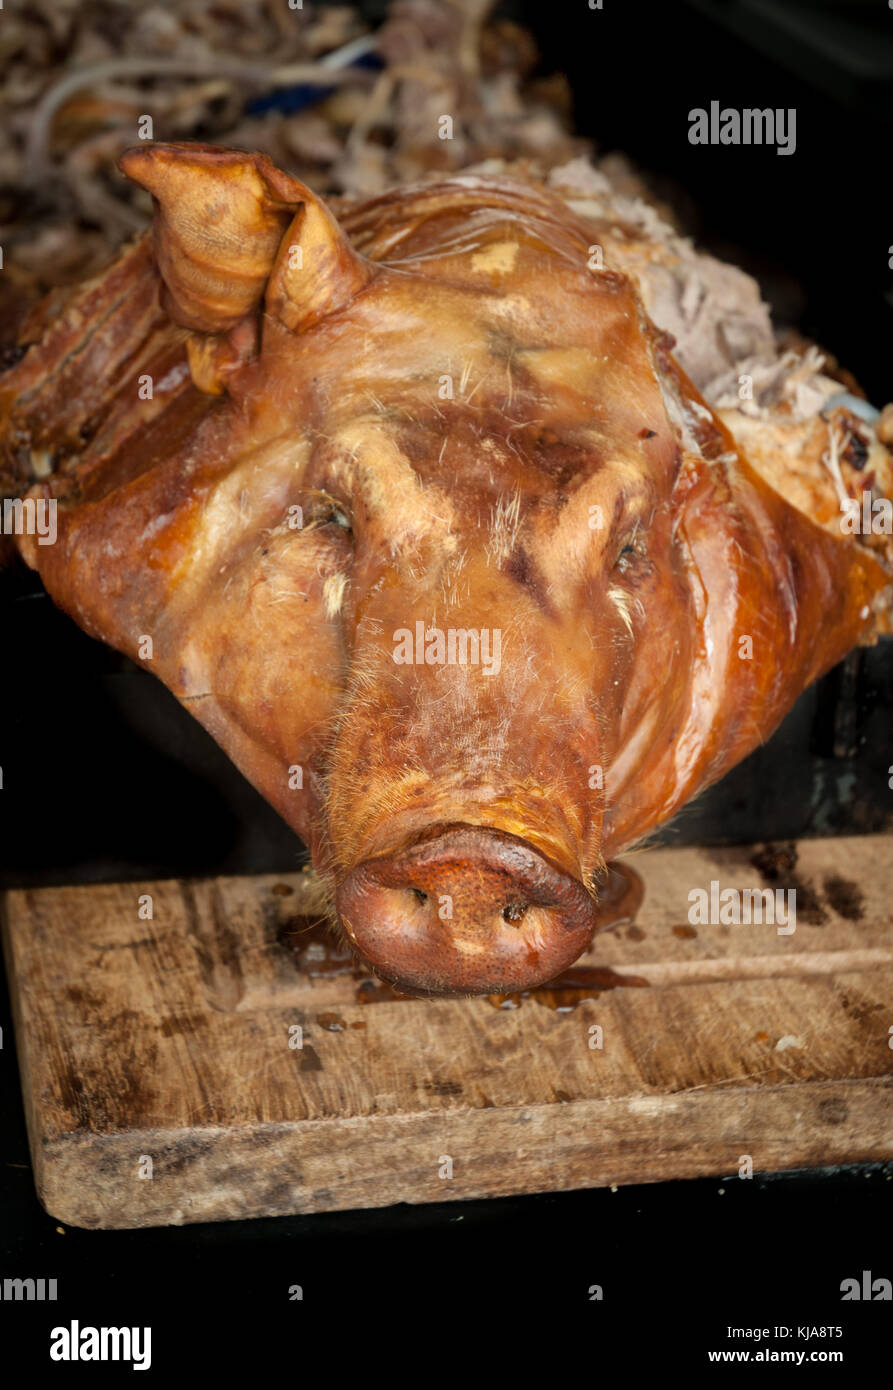 Spit roasted pig at a banquet. Stock Photo